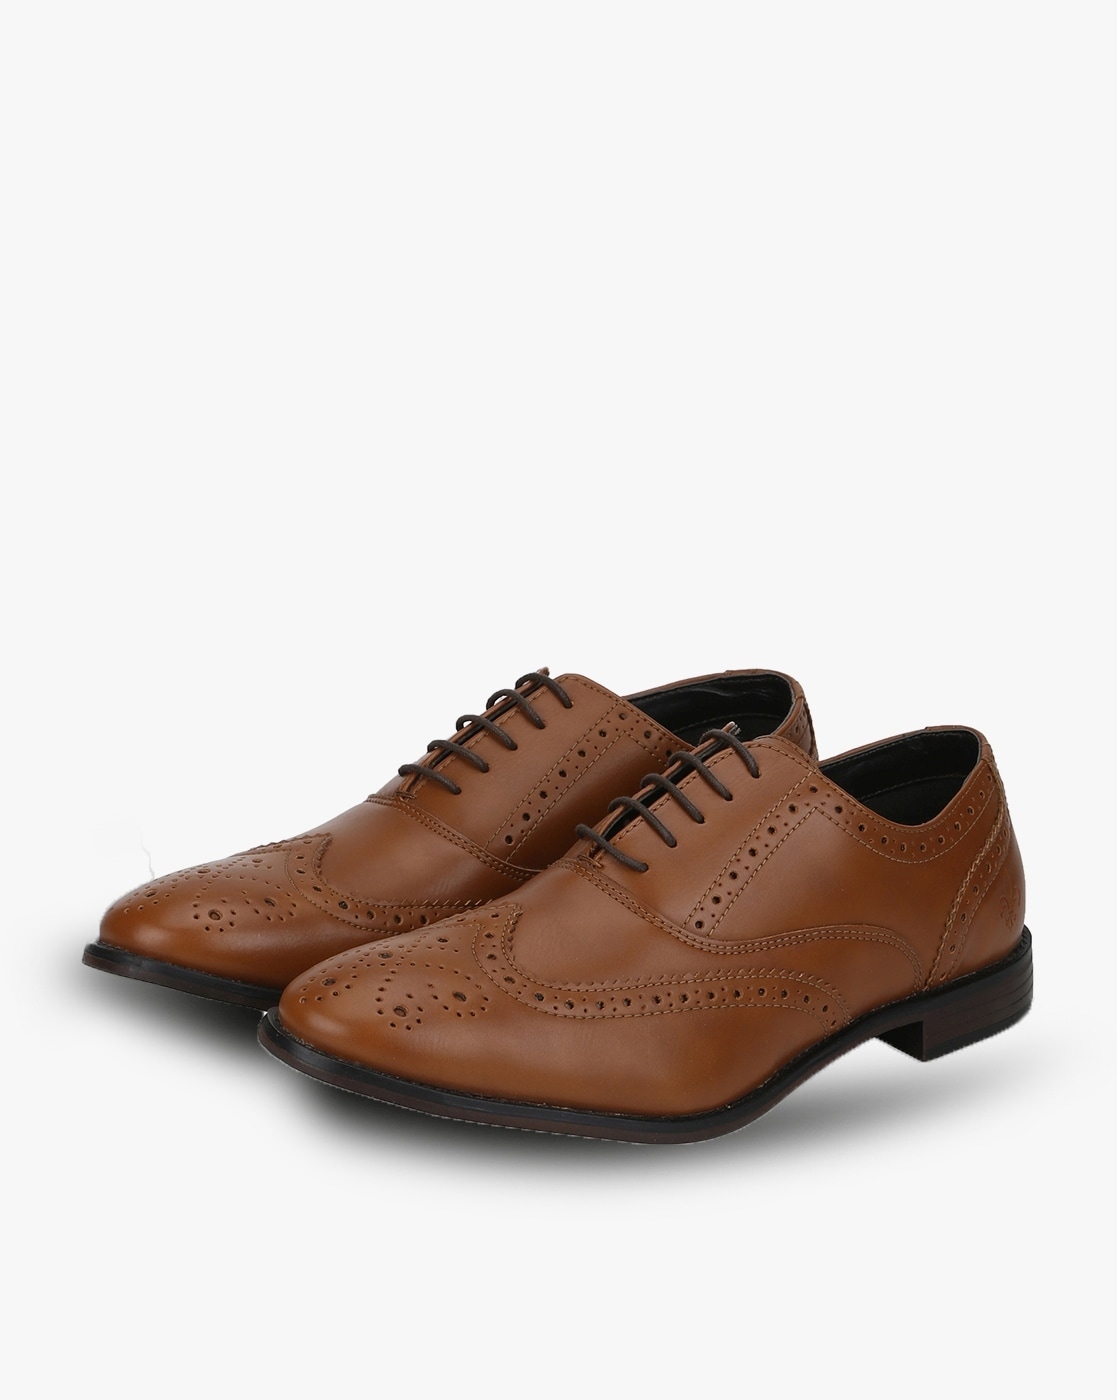 red tape bond street formal shoes